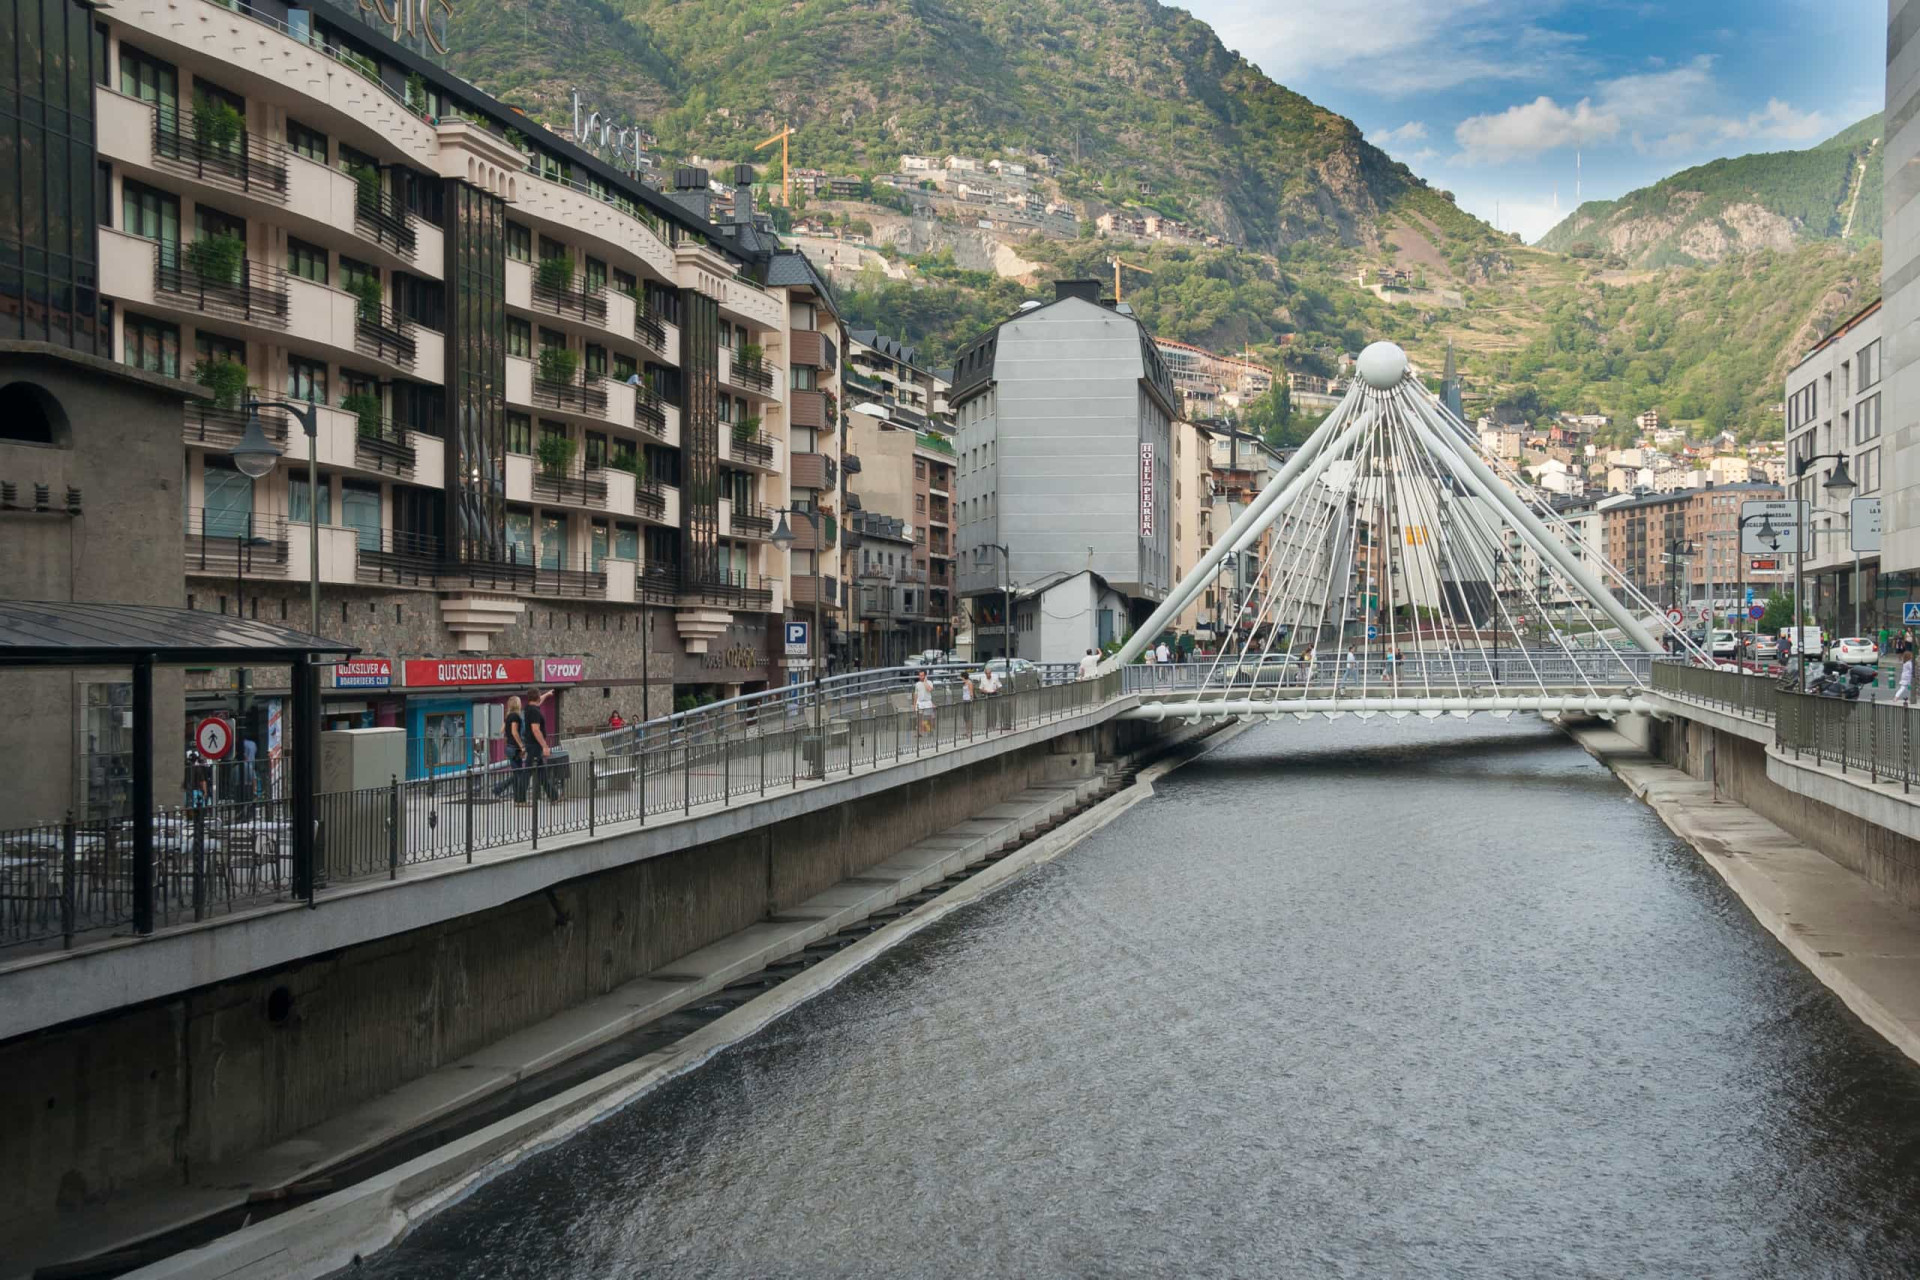 <p>Another unmissable photo op in Andorra la Vella is the Puente de Paris bridge. Small in size but big in personality, this peculiar-looking bridge connects the two sides of town separated by the Gran Valira river.</p><p><a href="https://www.msn.com/en-za/community/channel/vid-7xx8mnucu55yw63we9va2gwr7uihbxwc68fxqp25x6tg4ftibpra?cvid=94631541bc0f4f89bfd59158d696ad7e">Follow us and access great exclusive content every day</a></p>